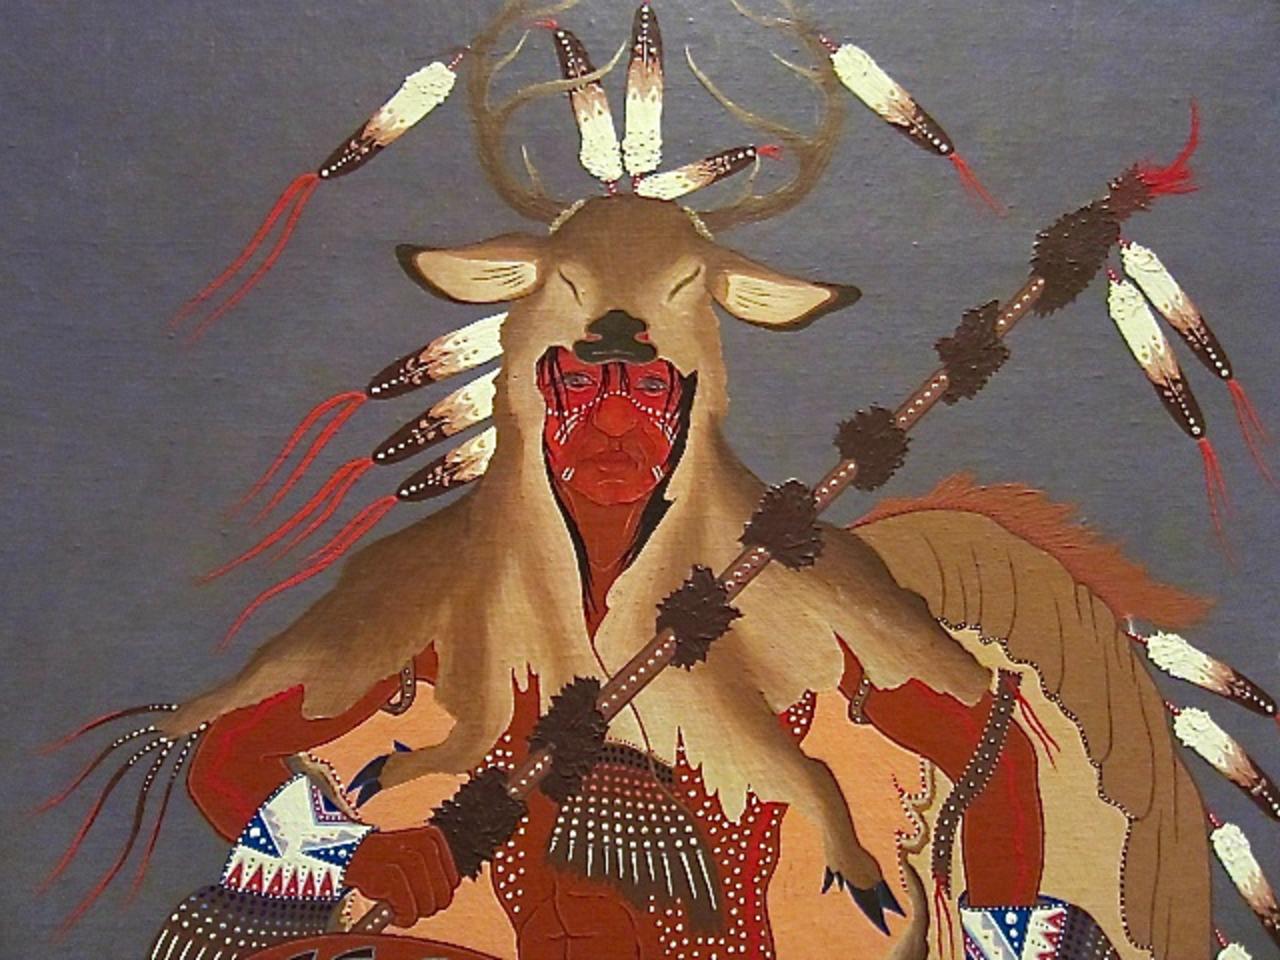 "The Deer Dancer,"  a painting by by Woody (Woodrow Wilson) Crumbo, (Potawatomi), 1912-1989. In addition to Crumbo's original paintings, a major selection of his prints are in the permanent collection at the National Museum of the American Indian. Find out more by going to americanindian.si.edu